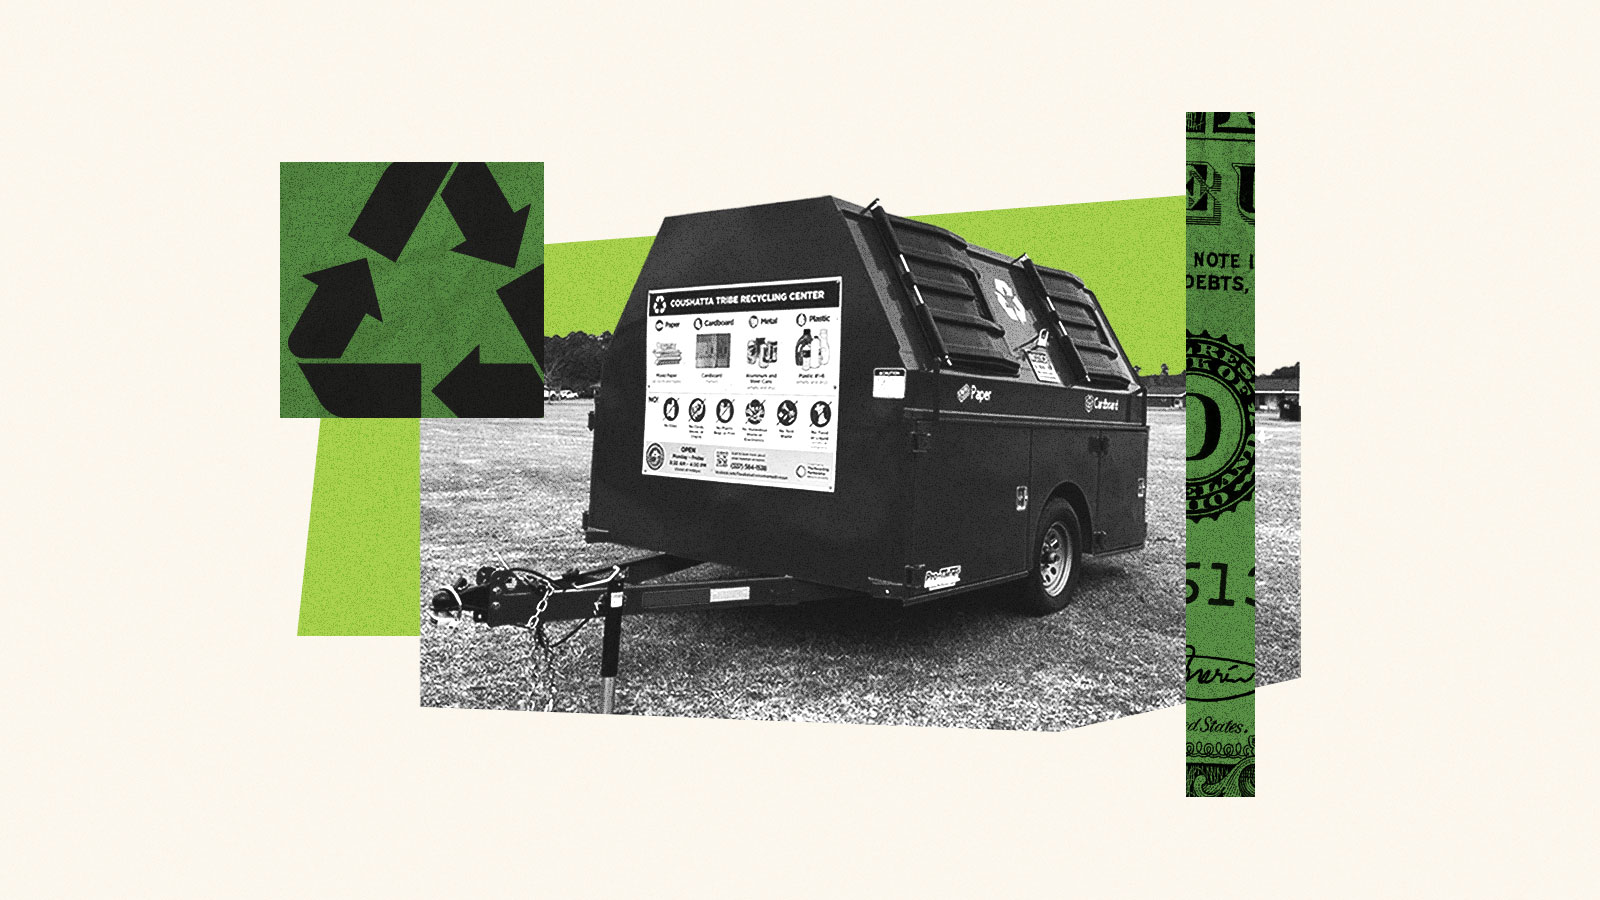 Collage of recycling symbol, recycling dumpster, and dollar bill